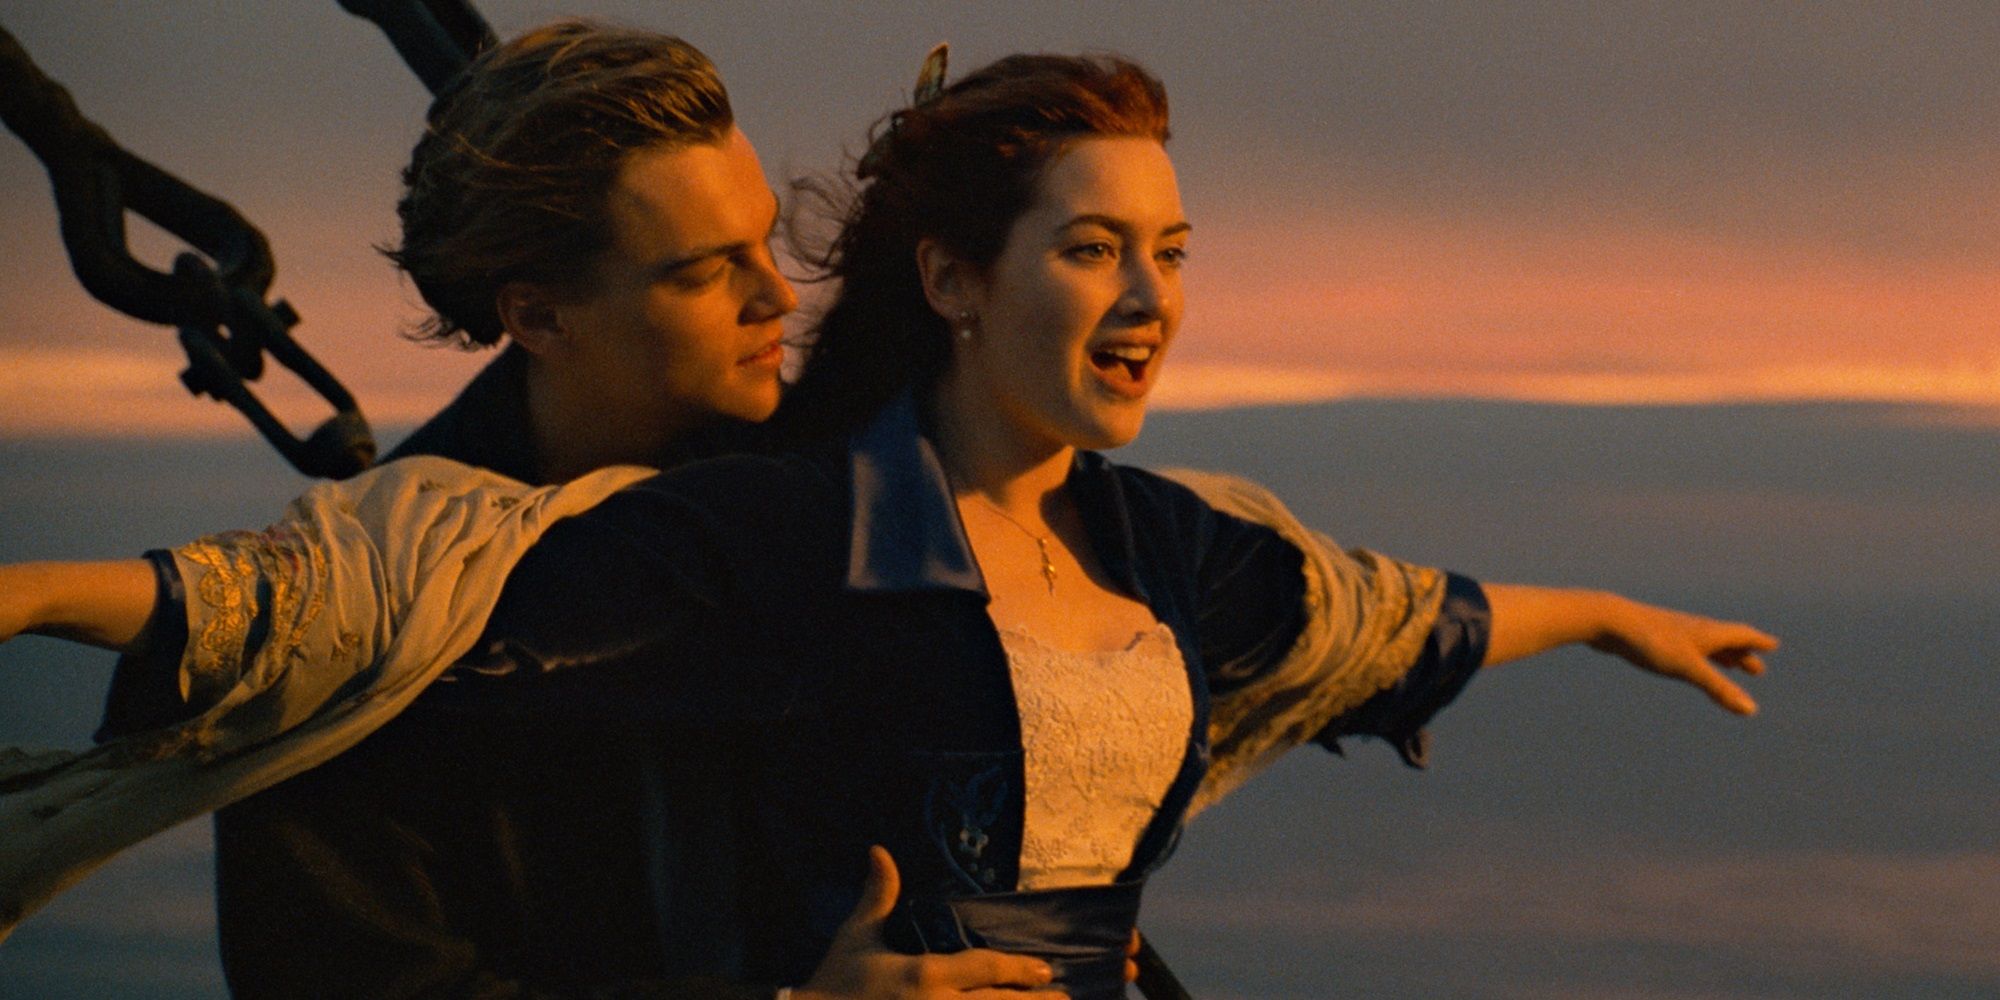 Jack and Rose with her arms out on bow of the boat in Titanic.